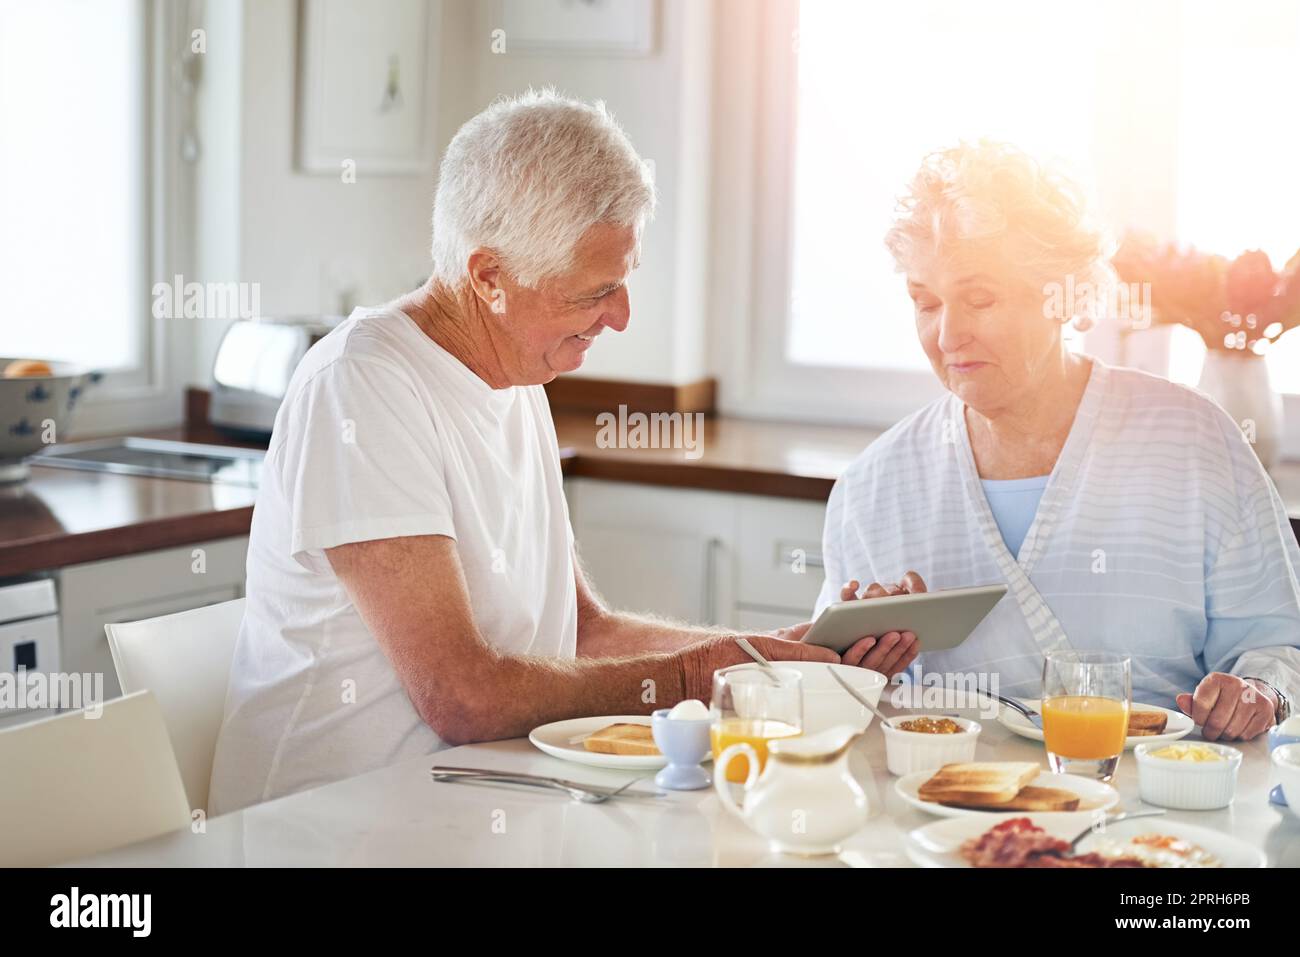 Theyre becoming tech savvy seniors. a senior couple using a digital tablet while having breakfast at home. Stock Photo